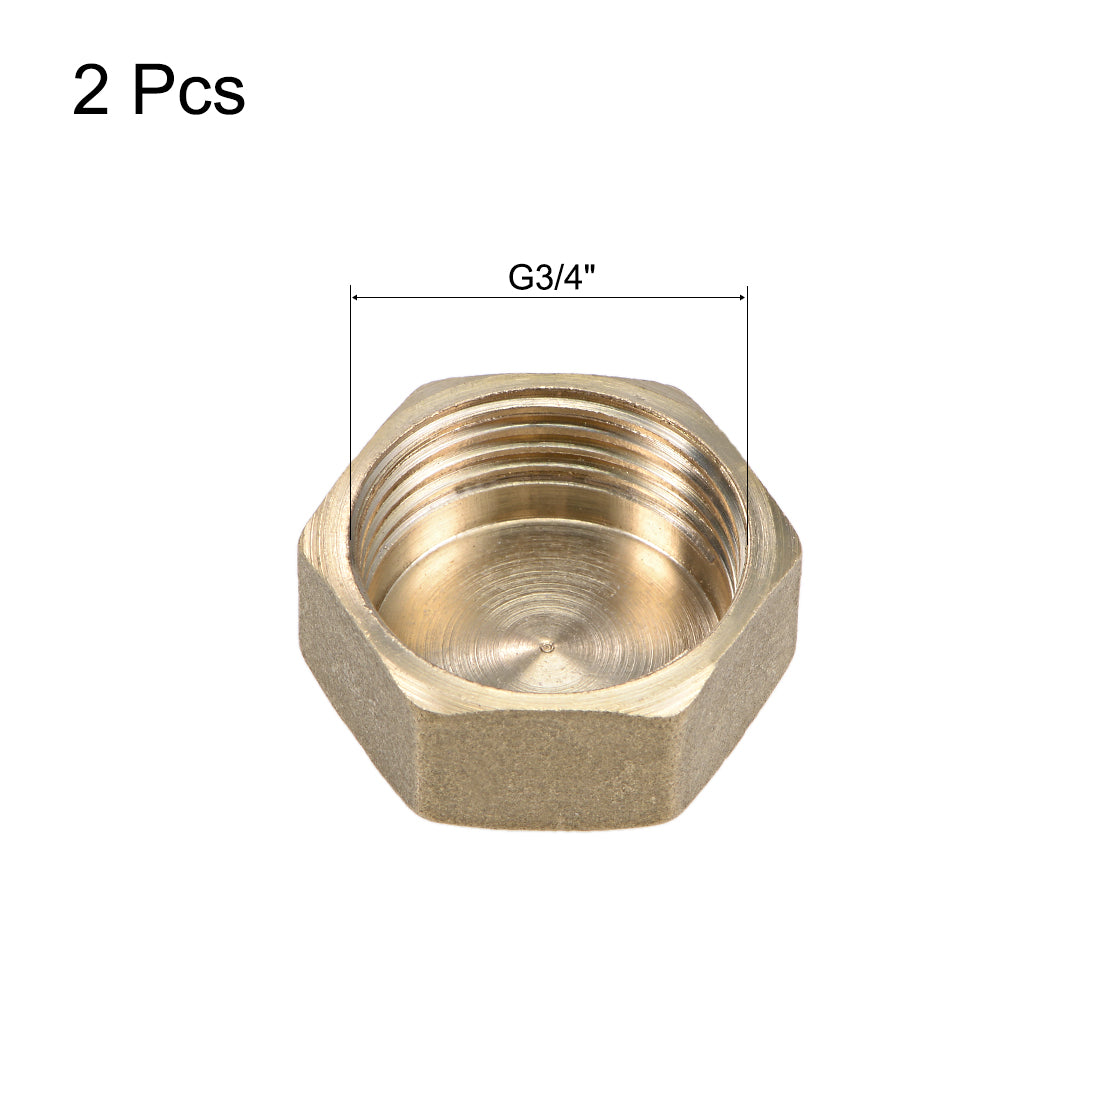 uxcell Uxcell 3/4 Inch Brass Cap 2pcs G3/4 Female Pipe Fitting Hex Compression Stop Valve Connector 13x30mm